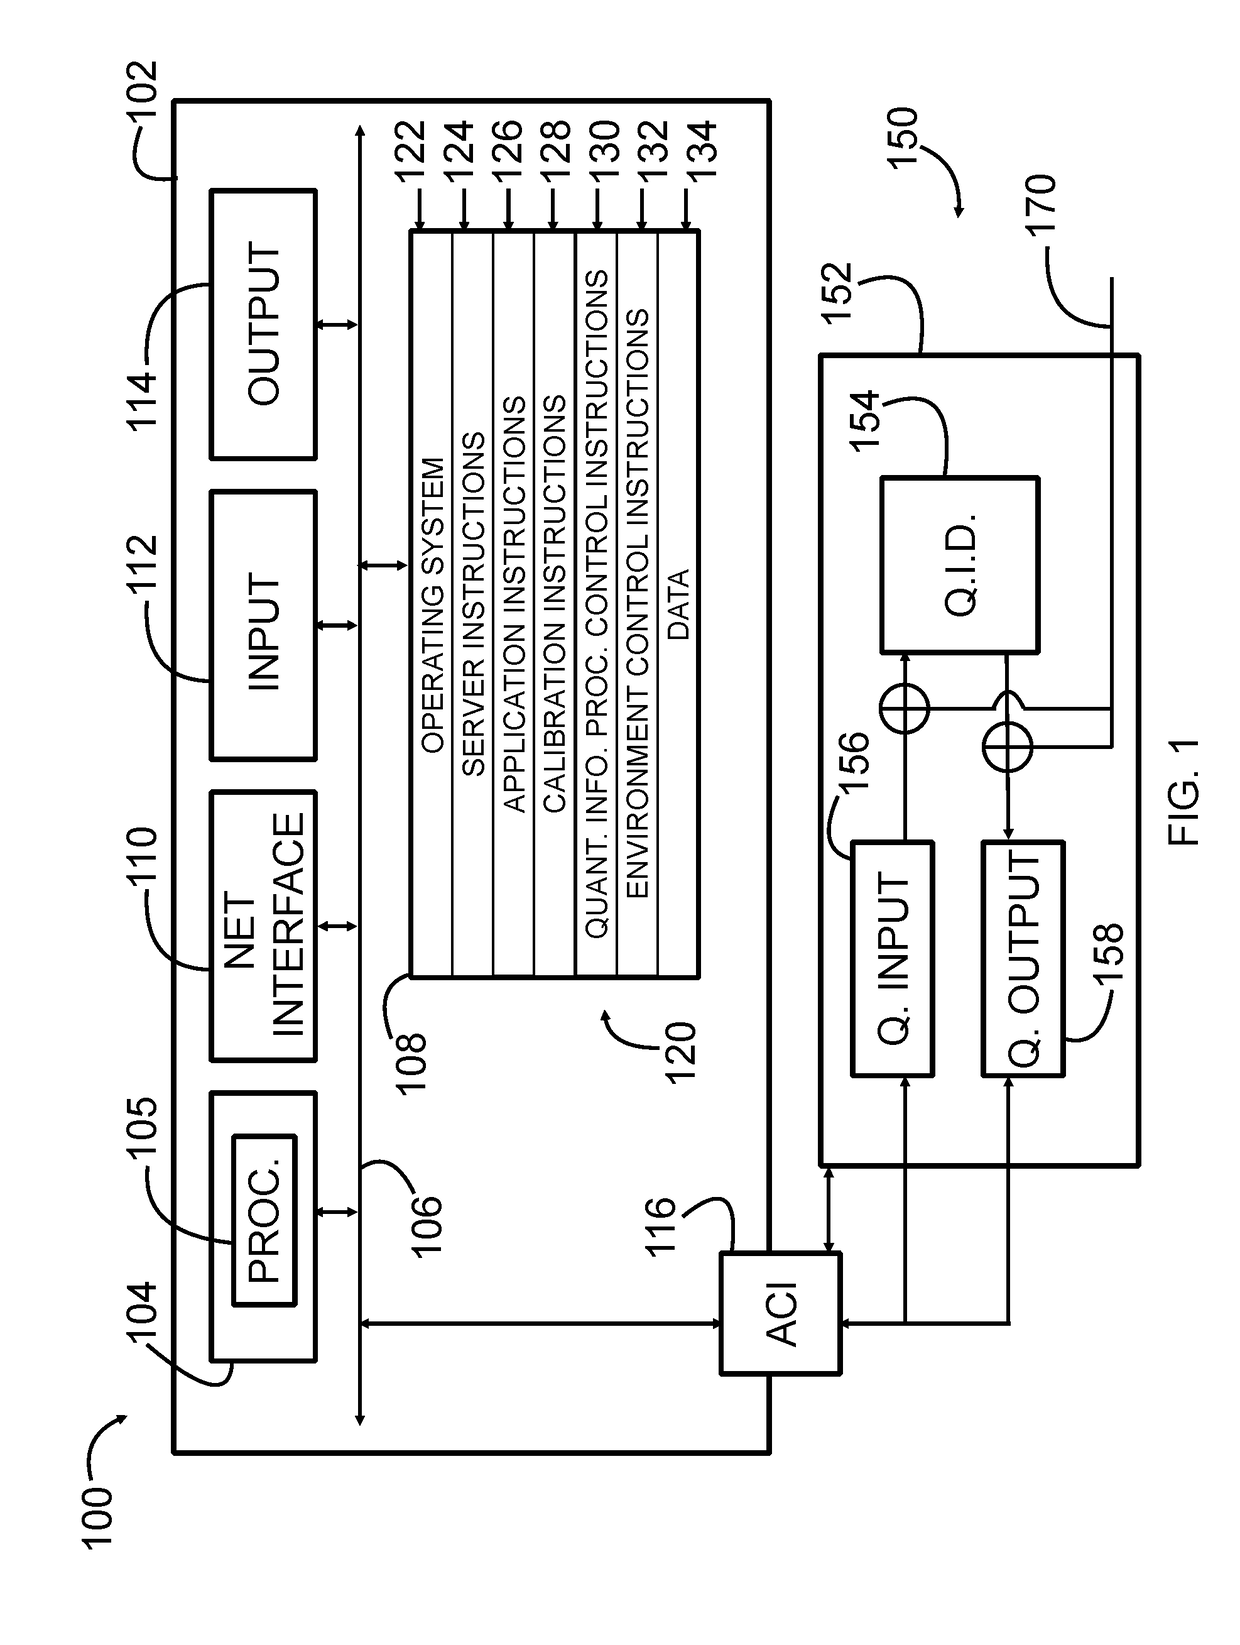 Systems, devices, and methods to interact with quantum information stored in spins